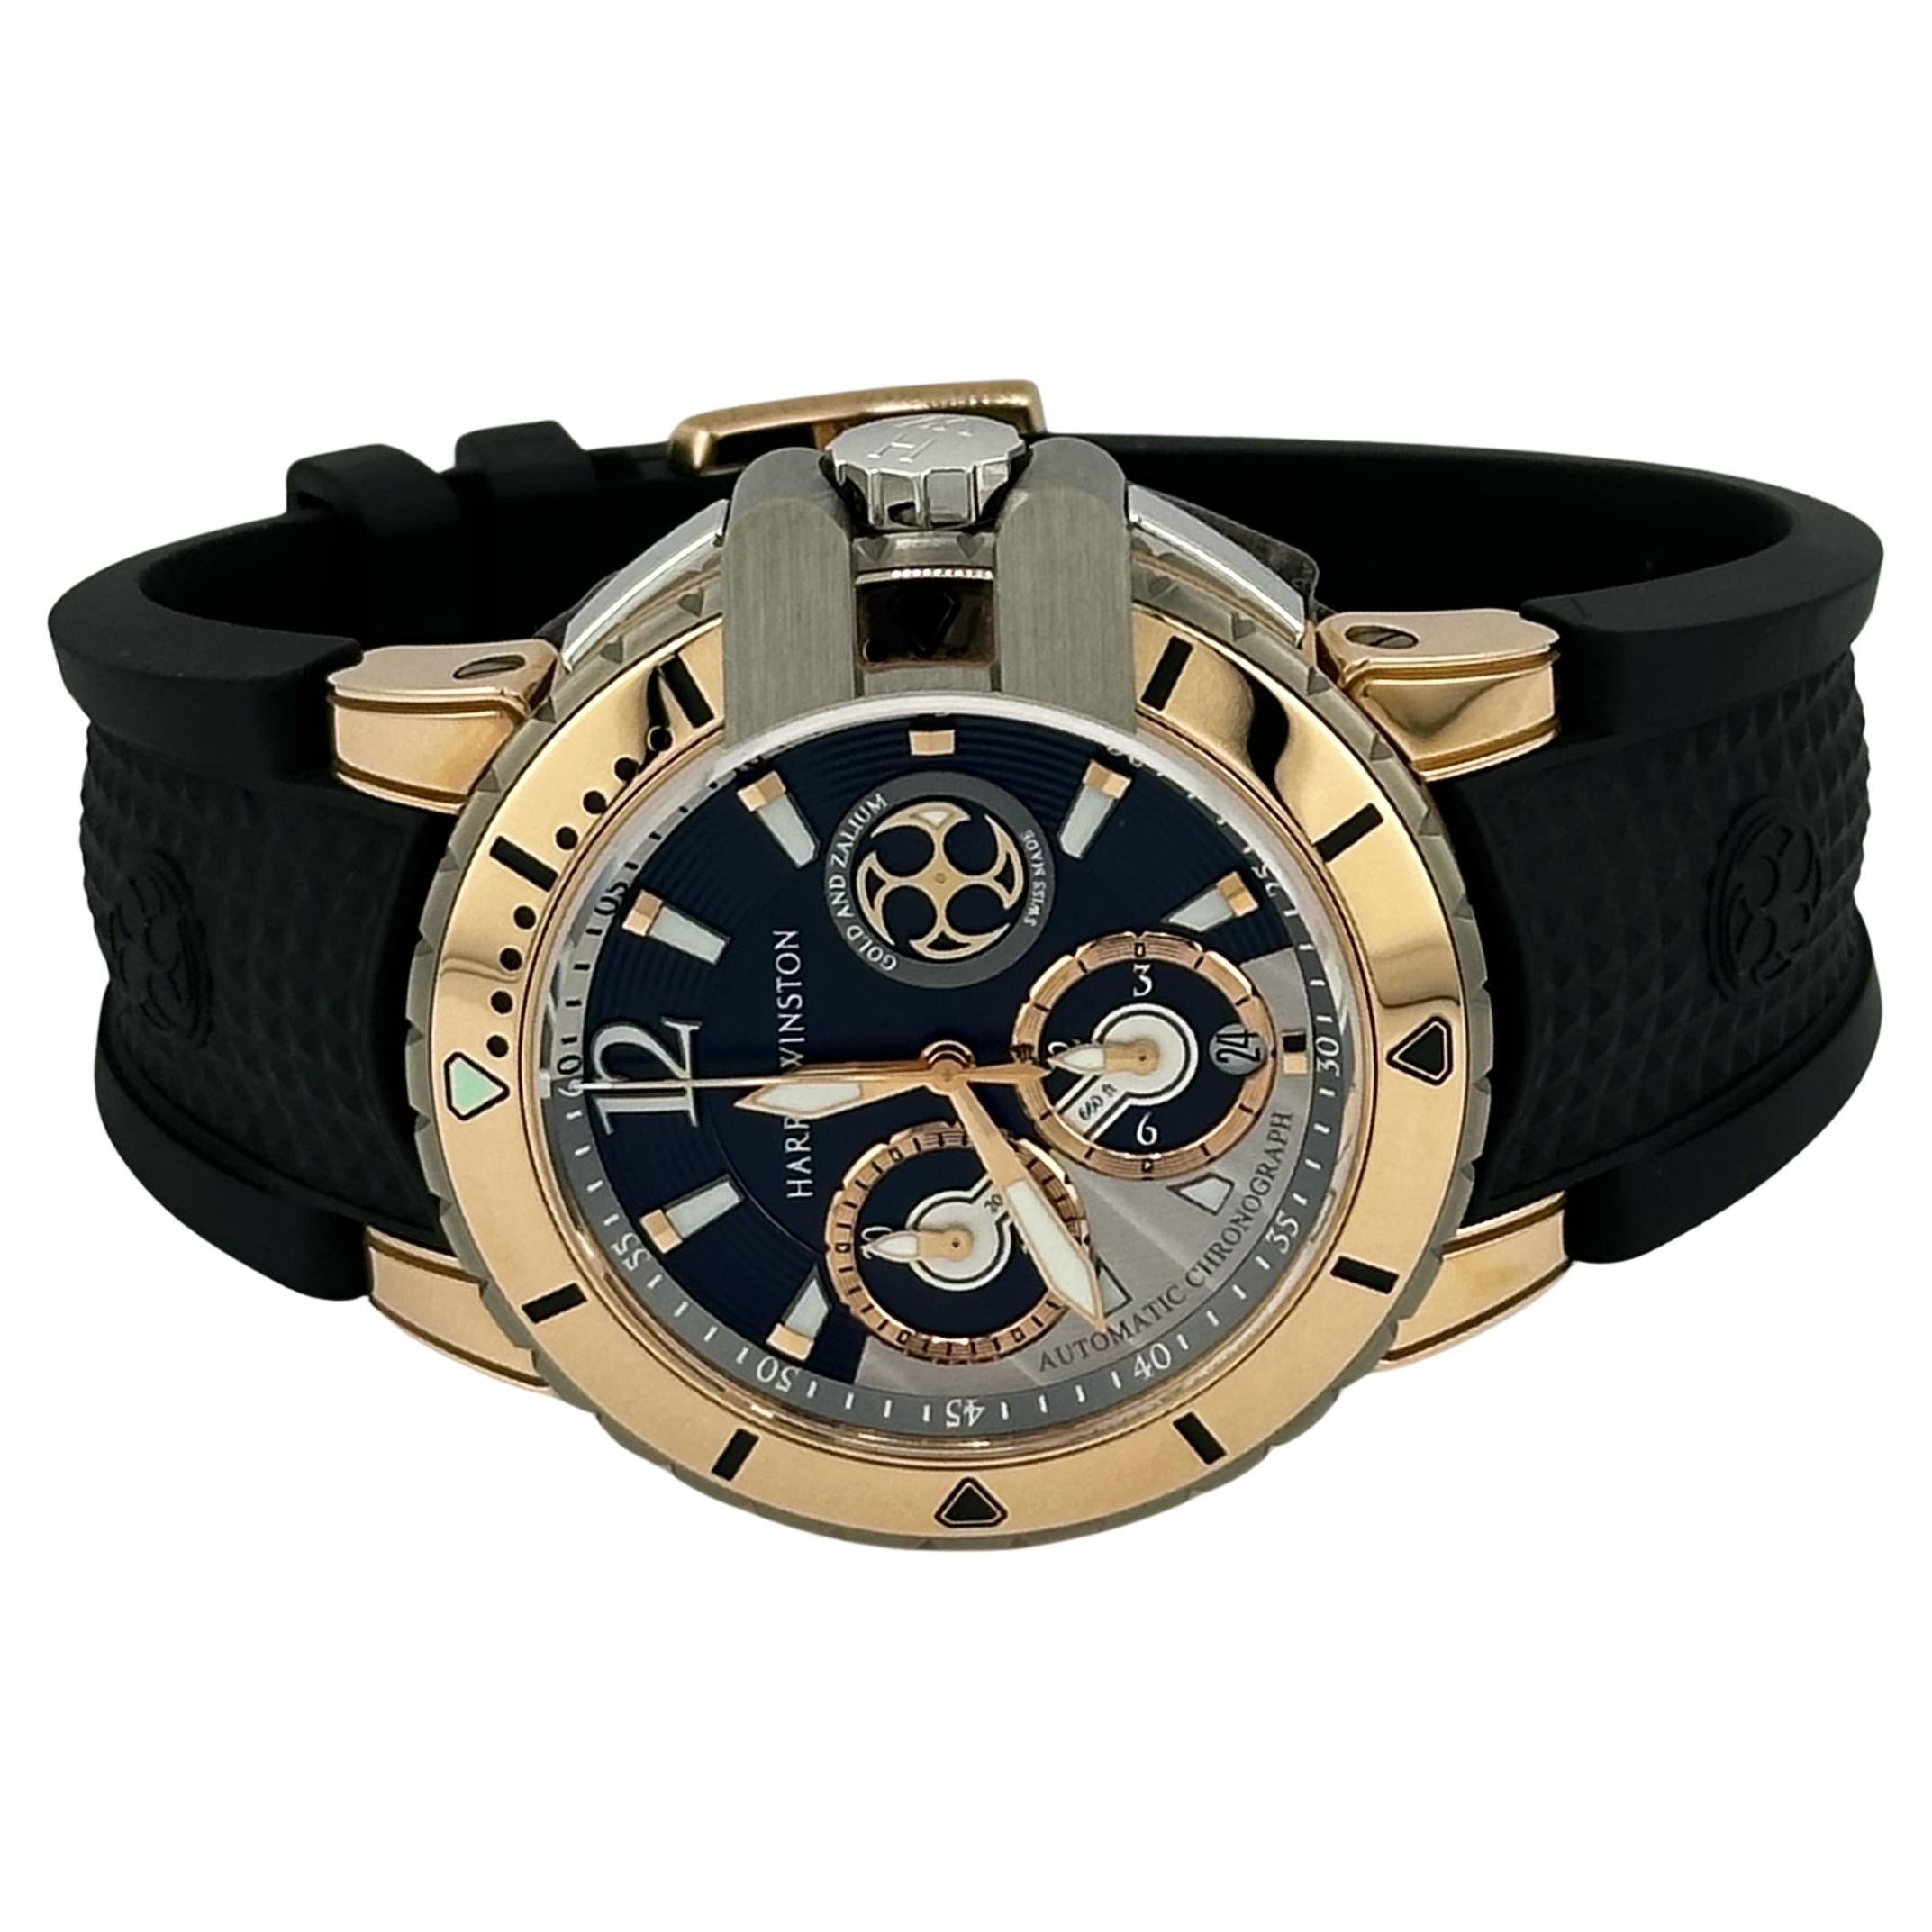 Harry Winston Project Z Ocean Diver Chronograph 44mm